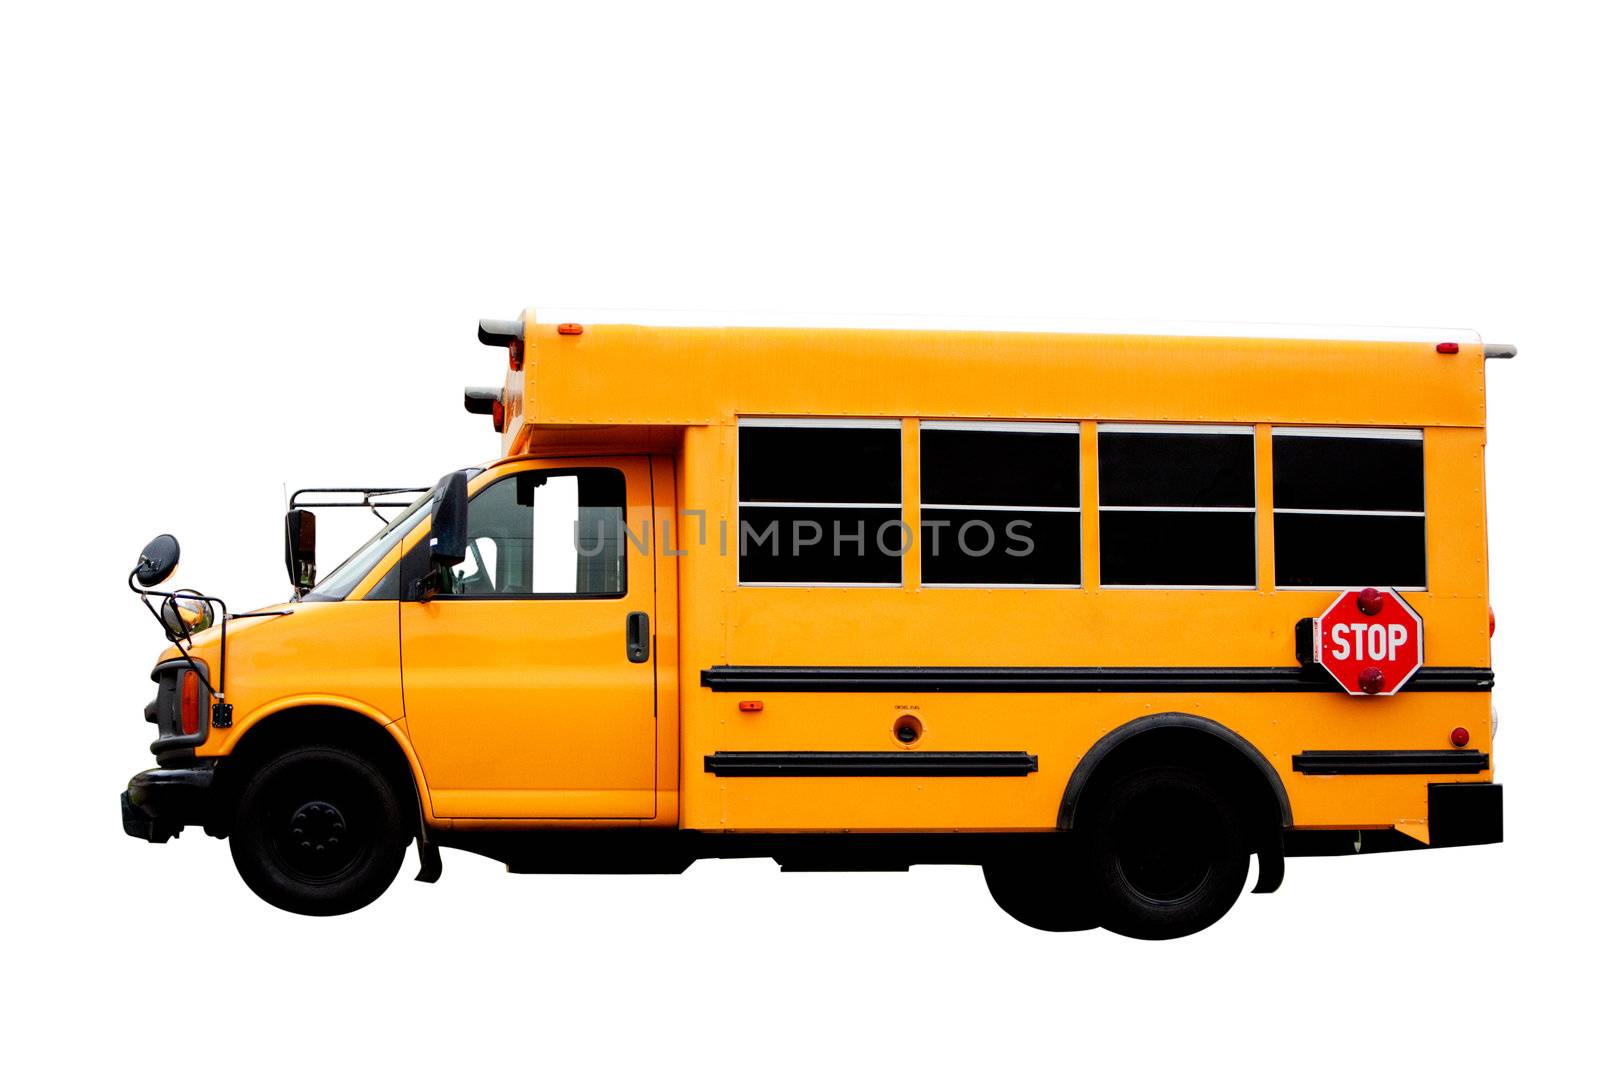 A yellow isolated school bus on white